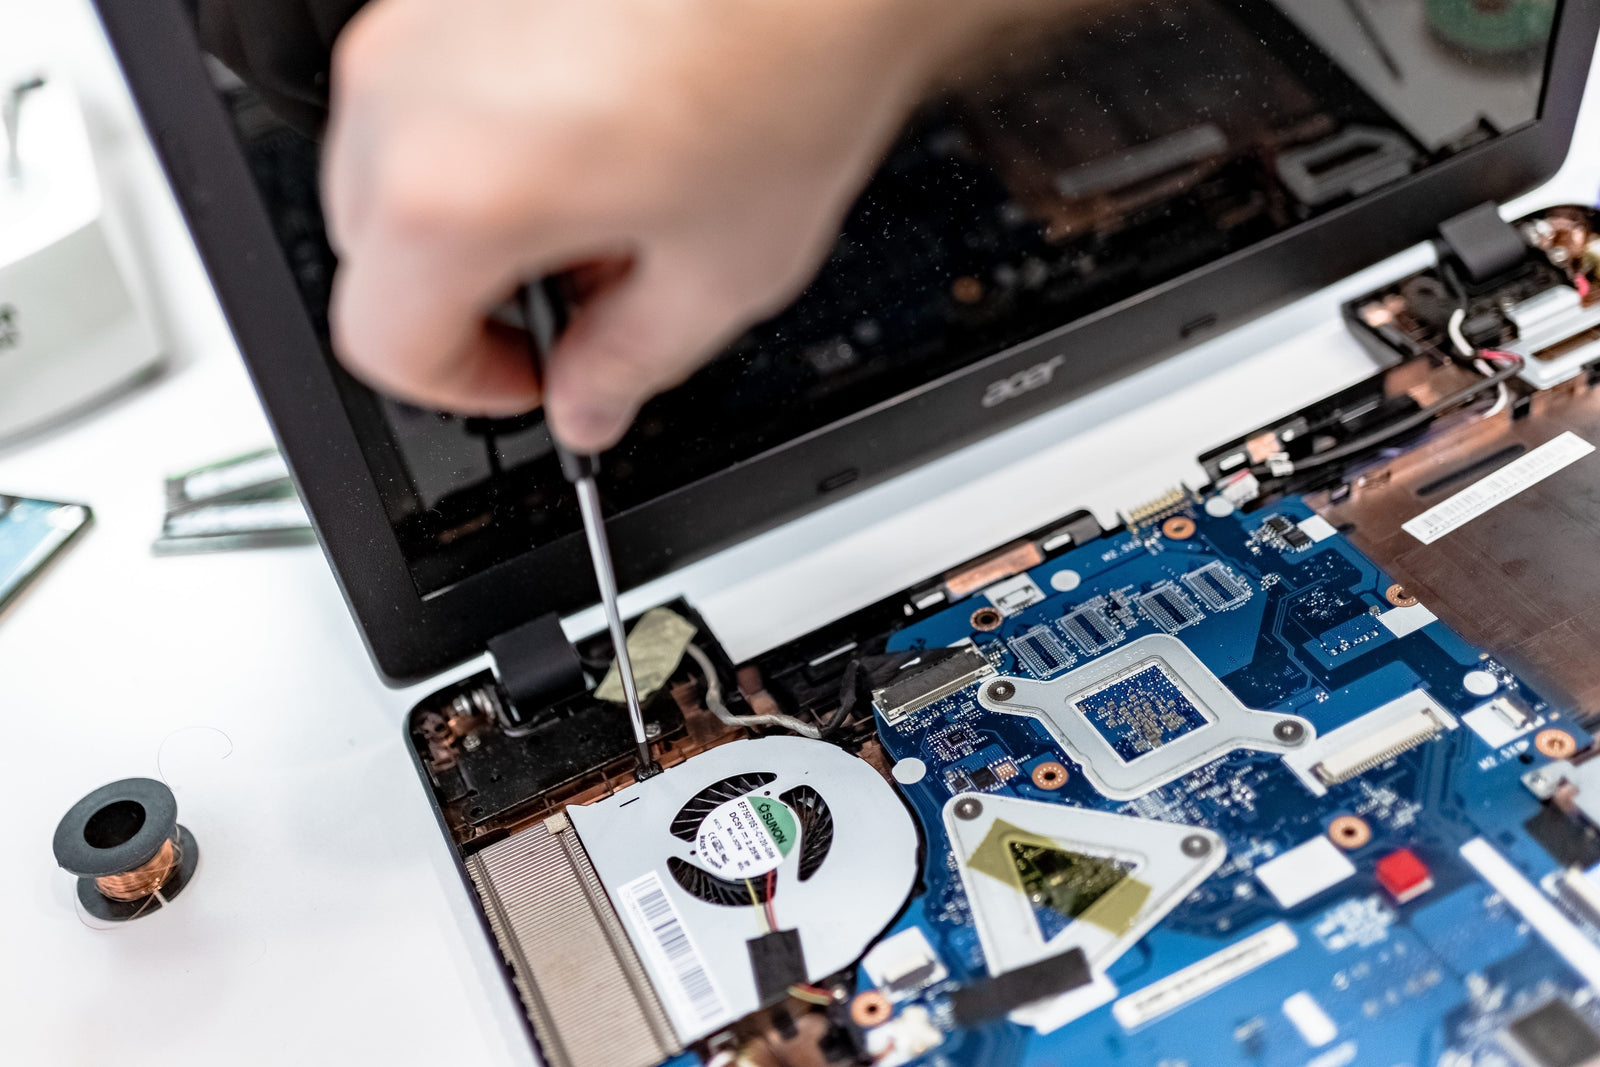 Where Do Refurbished Electronics Come From?